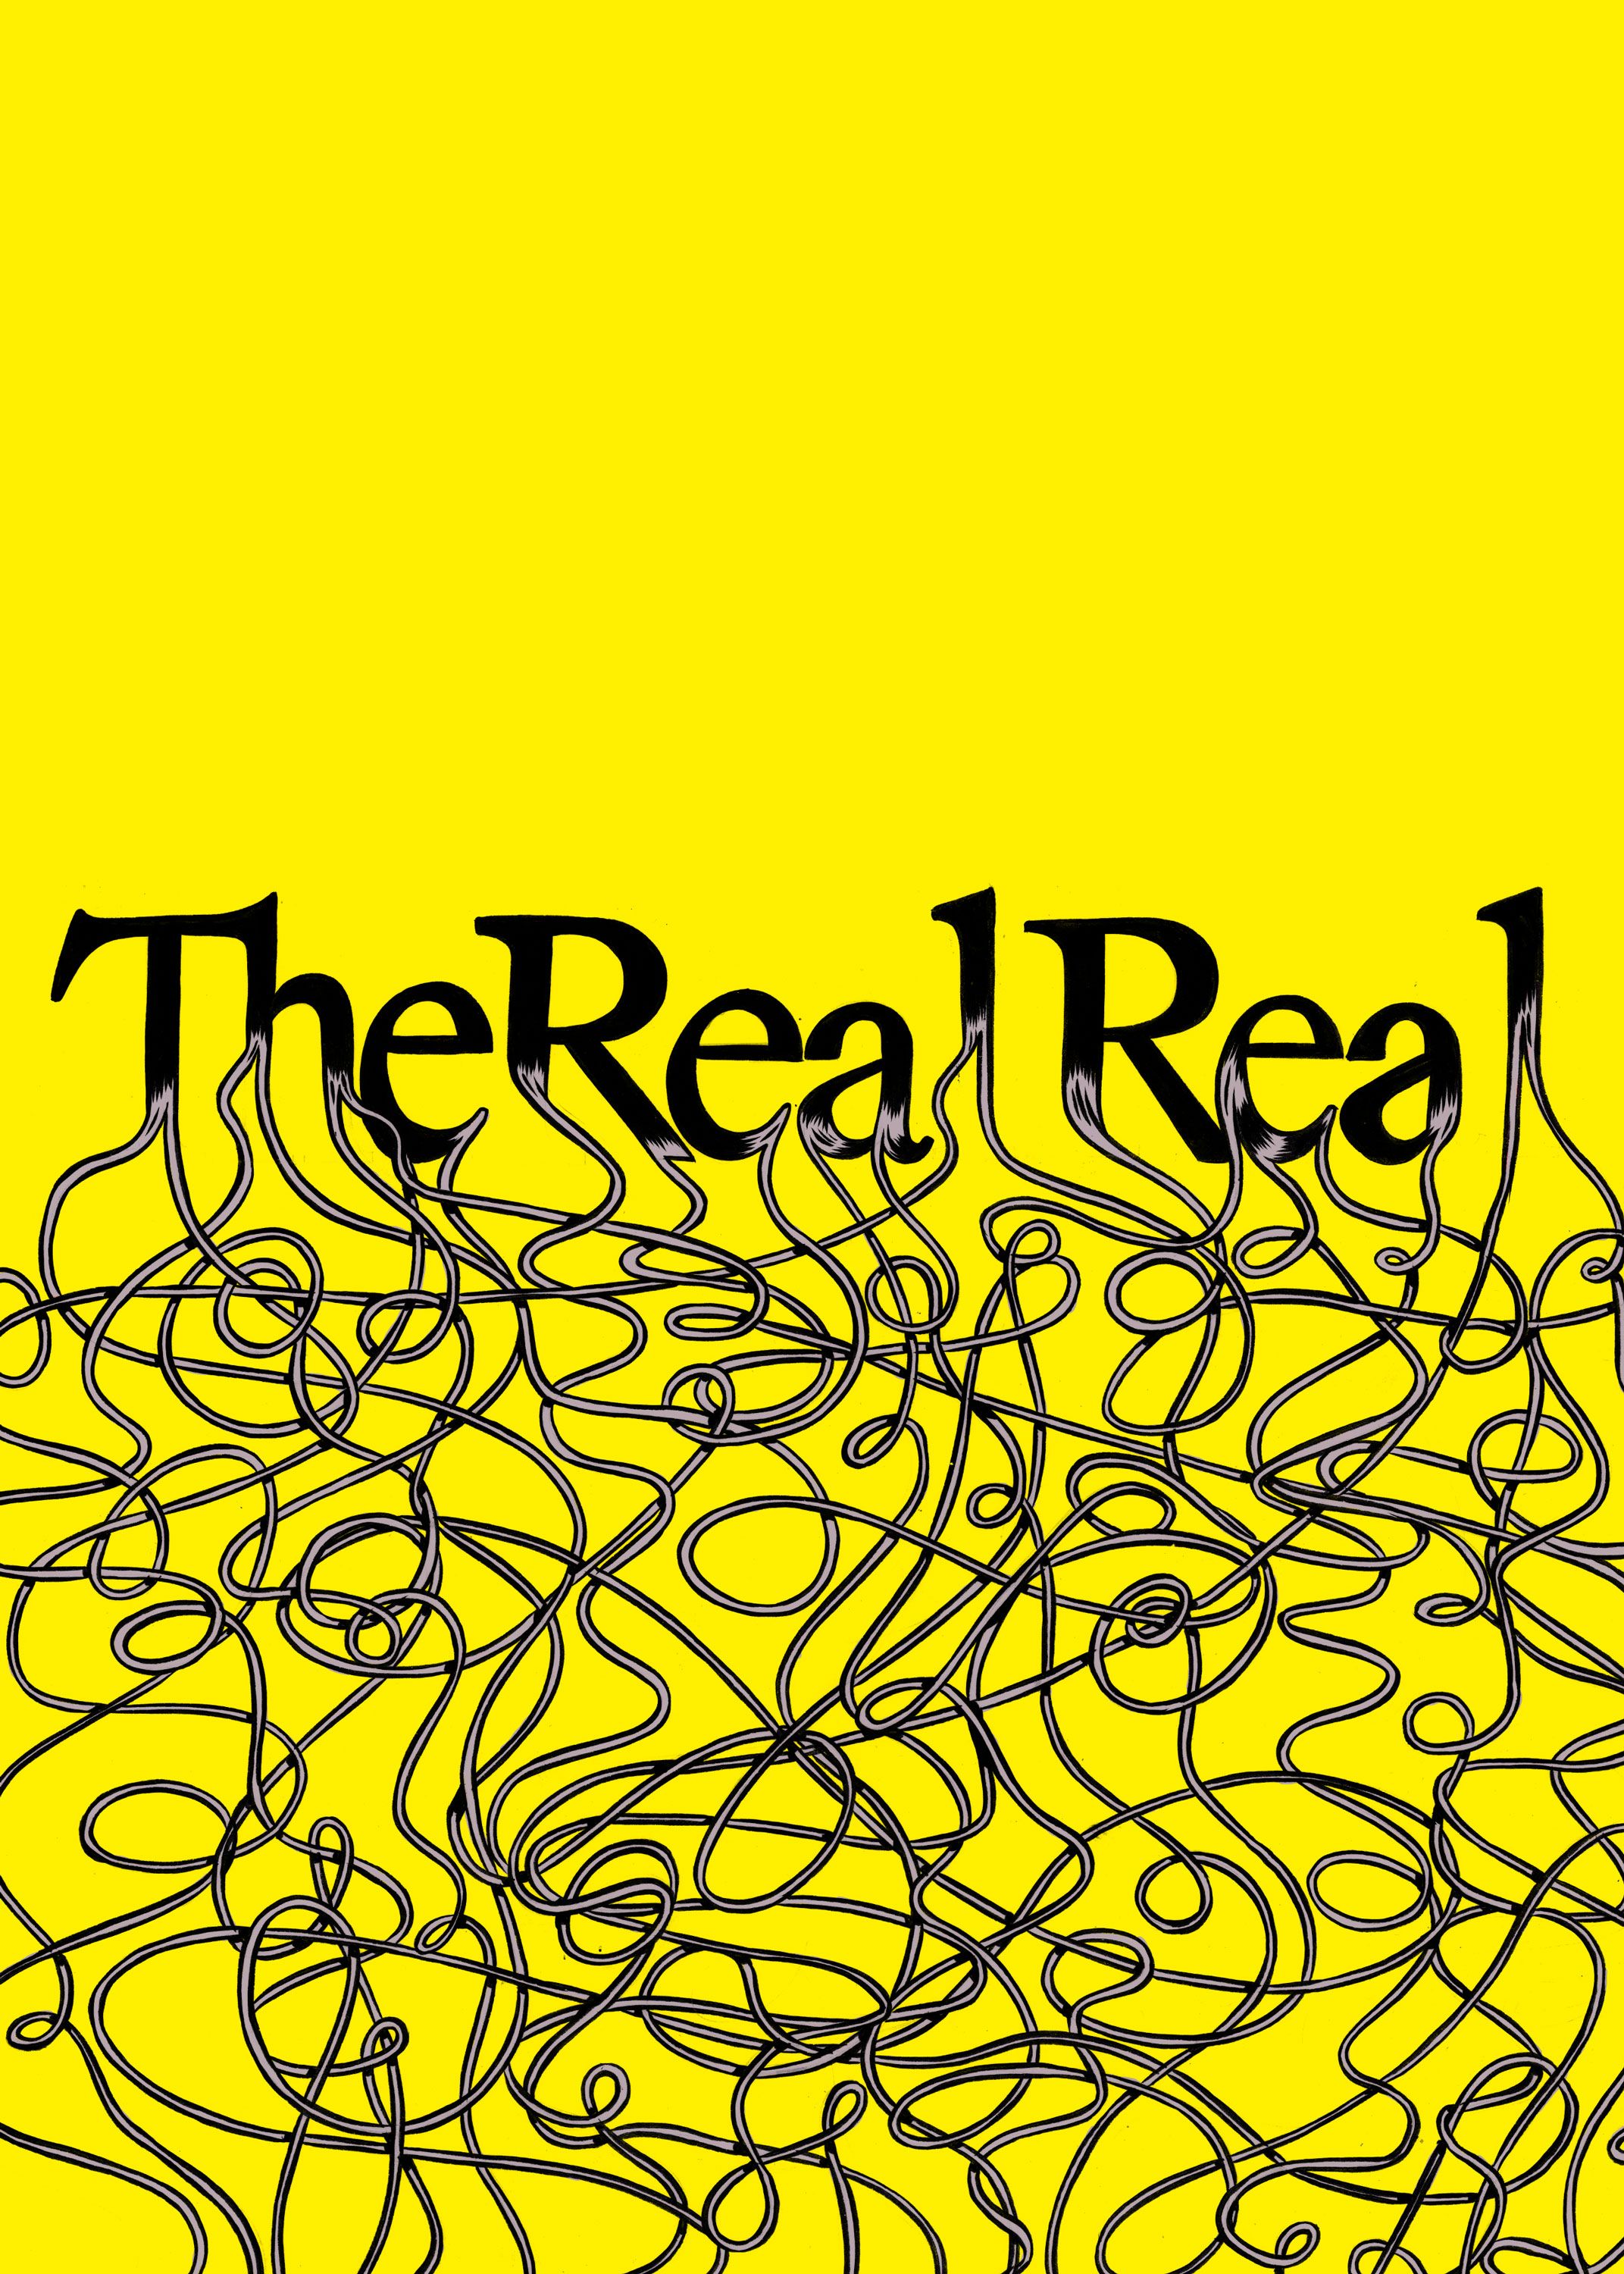 Luxury Consignment Platform the RealReal Opens Store in Los